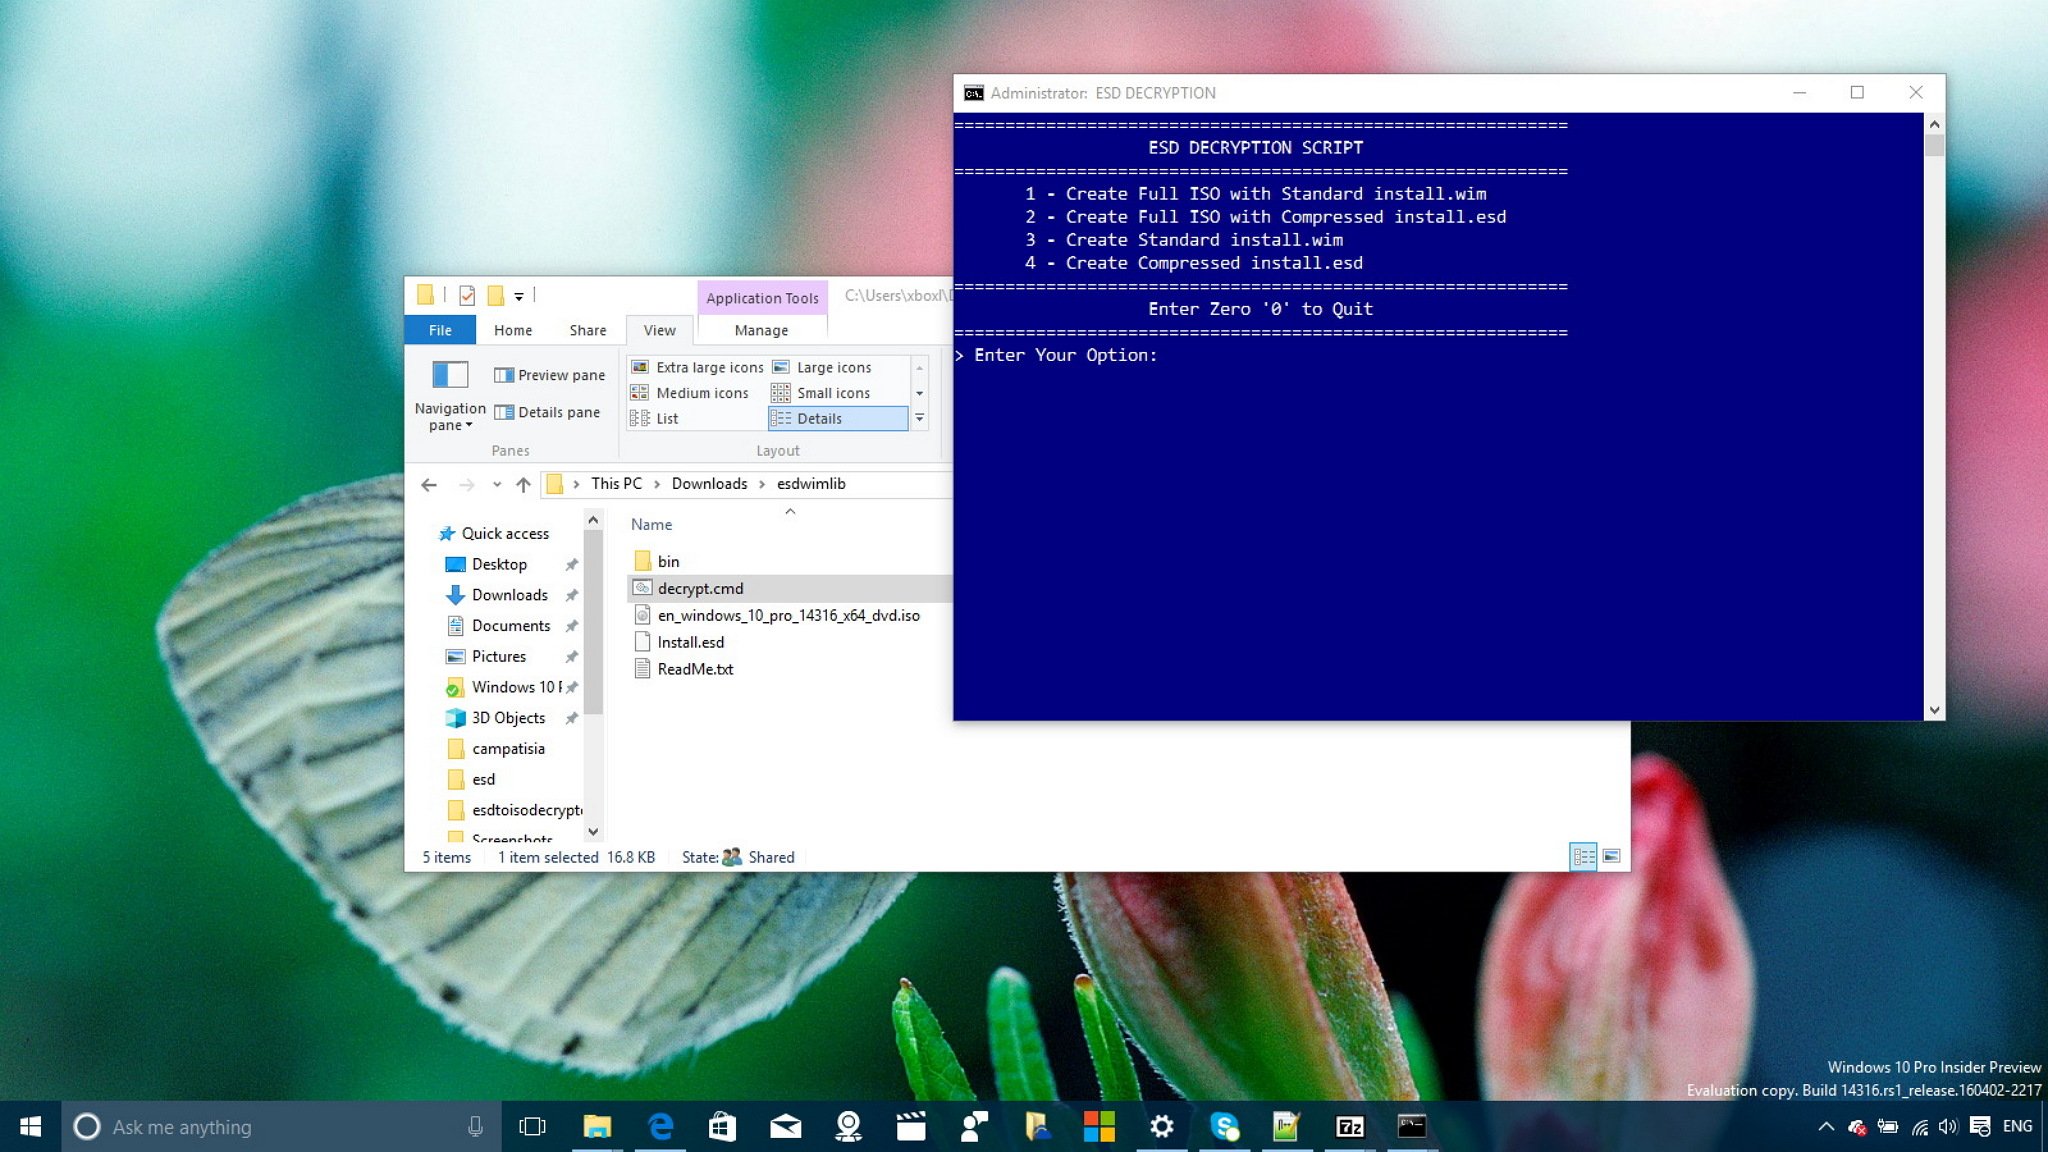 How to create a Windows 15 ISO file using an Install.ESD image